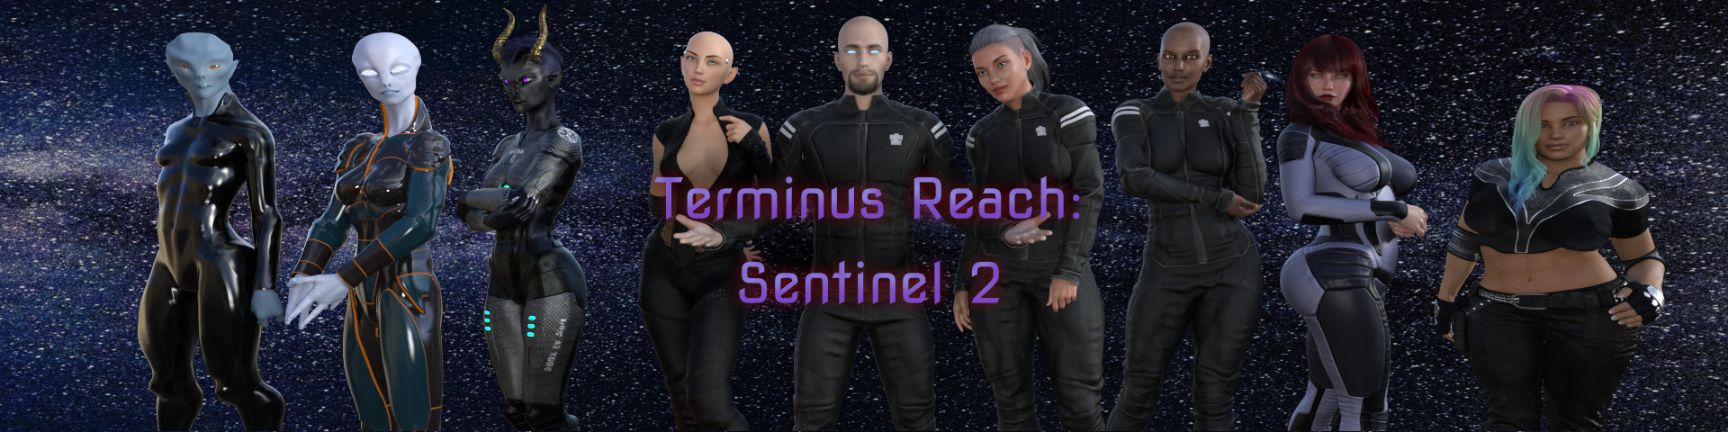 Terminus Reach Sentinel 2 Apk Android Adult Game Download